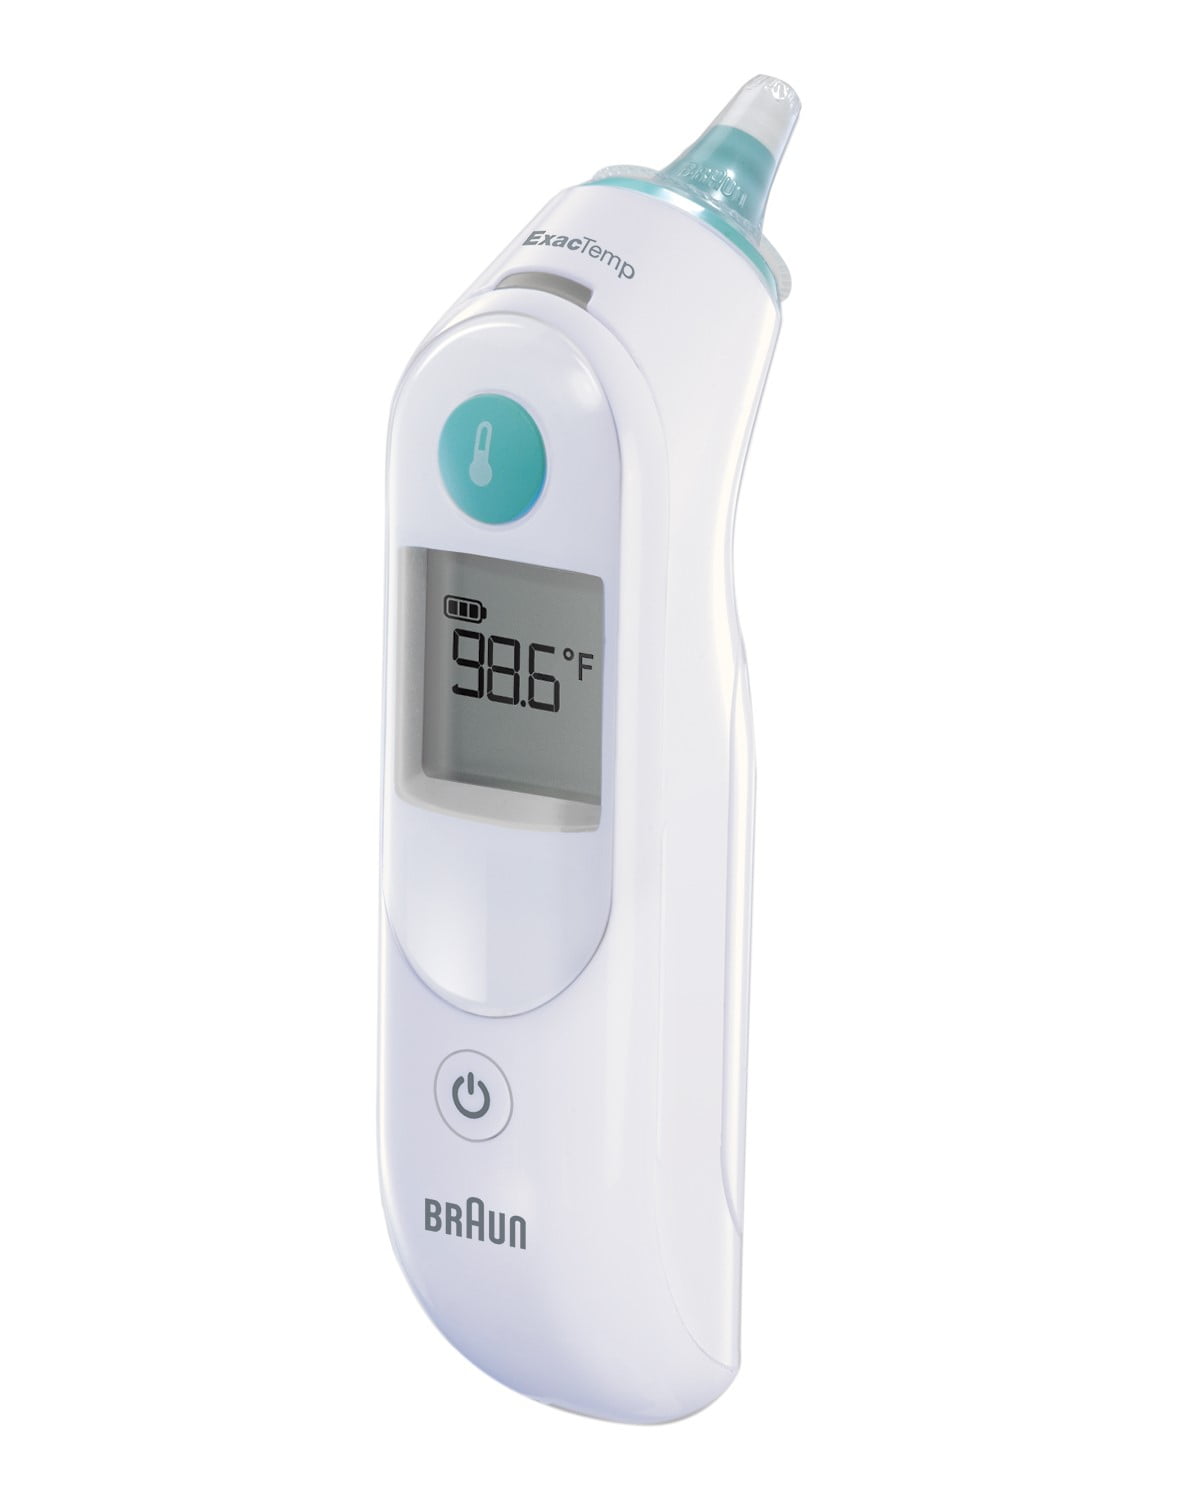 NEW Braun ThermoScan 5 6020 Baby Digital Ear Thermometer with 160 Probe Covers